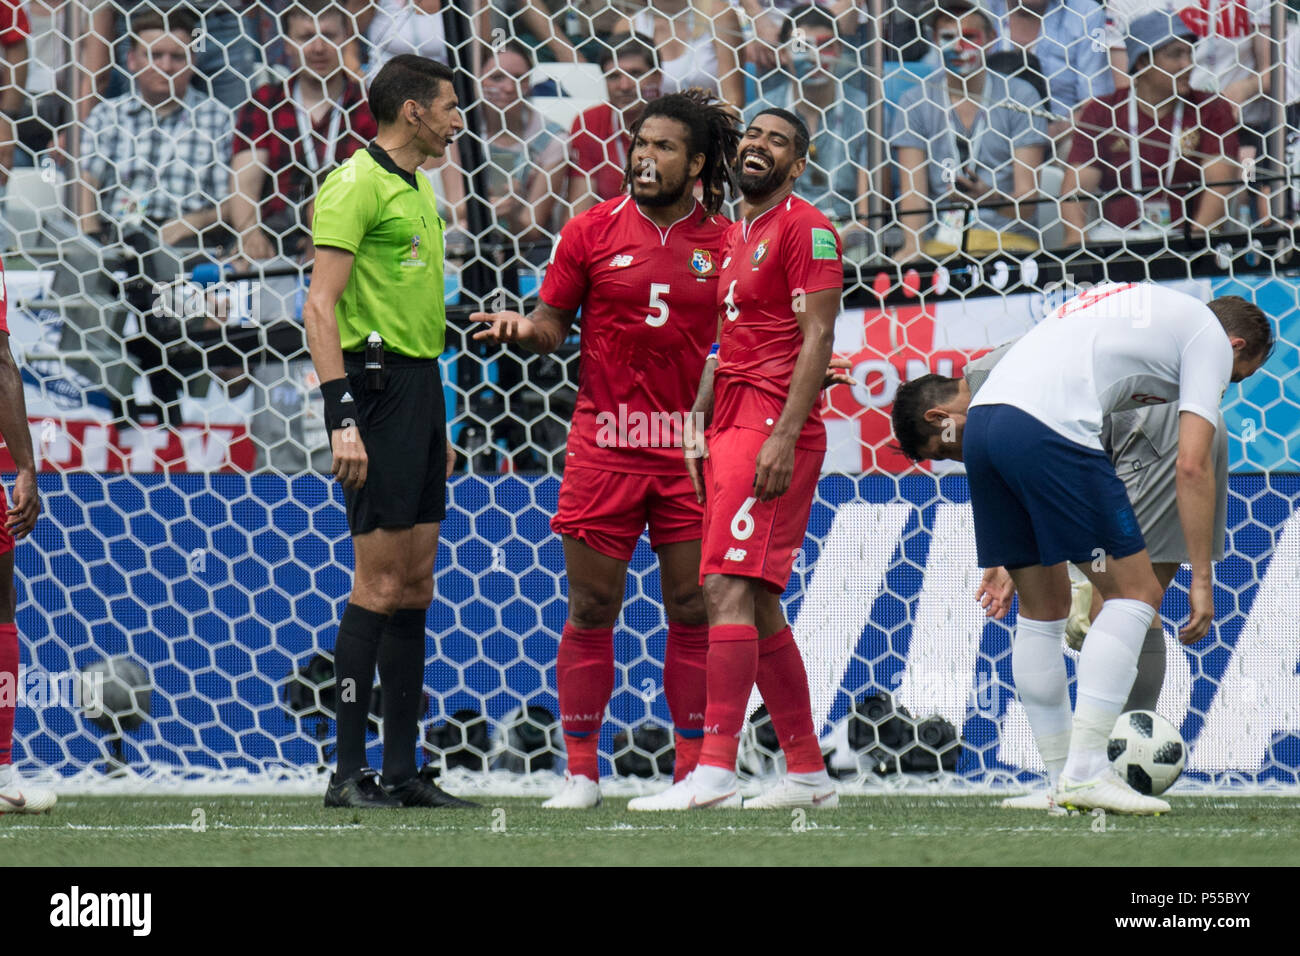 Roman TORRES (2nd left to right, PAN) and Gabriel GOMEZ (2nd from right, PAN) discuss referee Ghead GRISHA's penalty decision (EGY), while Harry KANE (ENG) puts the ball to frustration, frustrated, frustratedet, disappointed, showered, decapitation, disappointment, sad, discussion, whole figure, England (ENG) - Panama (PAN) 6: 1, preliminary round, Group G, match 30, on 24.06.2018 in Nizhny Novgorod; Football World Cup 2018 in Russia from 14.06. - 15.07.2018. | usage worldwide Stock Photo